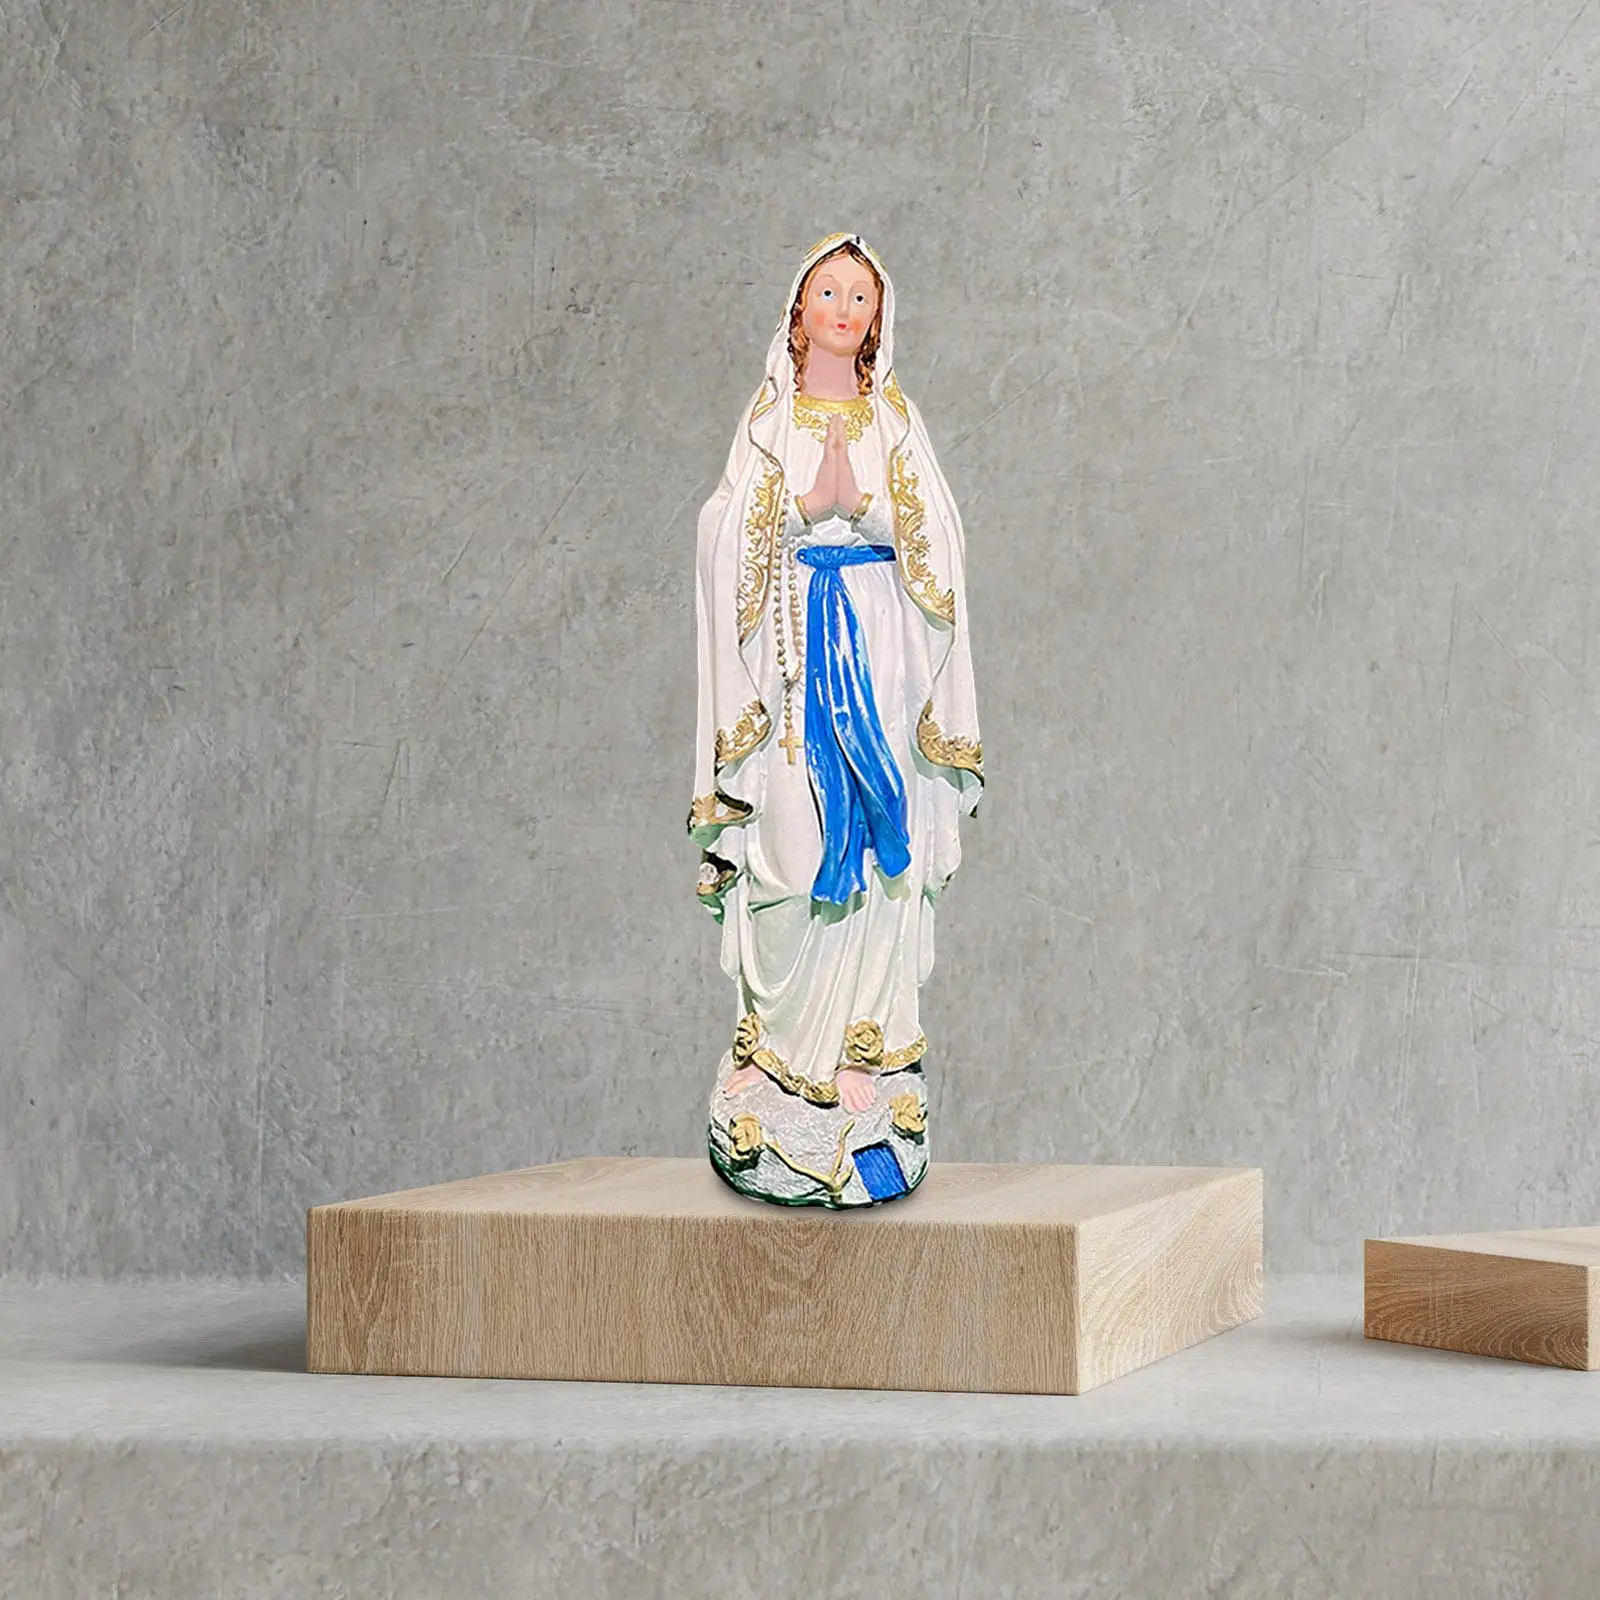 Mary Figurine Worship Handpainted Holy Ornament Collection Decoration for Collectibles Tabletop Home Accent Gift 11.81inch.